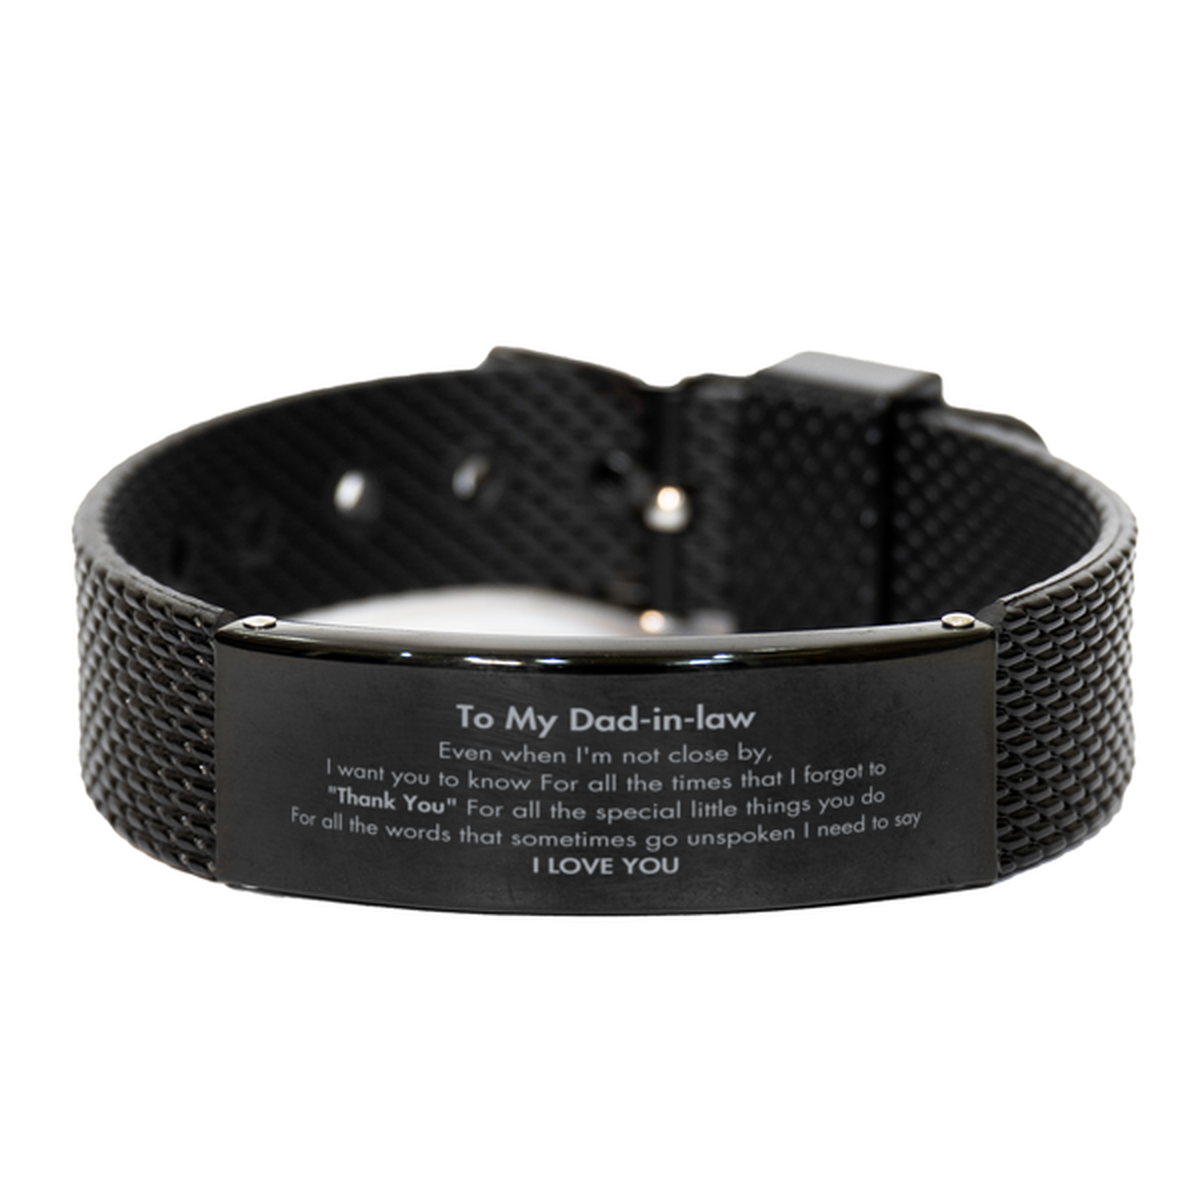 Thank You Gifts for Dad-in-law, Keepsake Black Shark Mesh Bracelet Gifts for Dad-in-law Birthday Mother's day Father's Day Dad-in-law For all the words That sometimes go unspoken I need to say I LOVE YOU